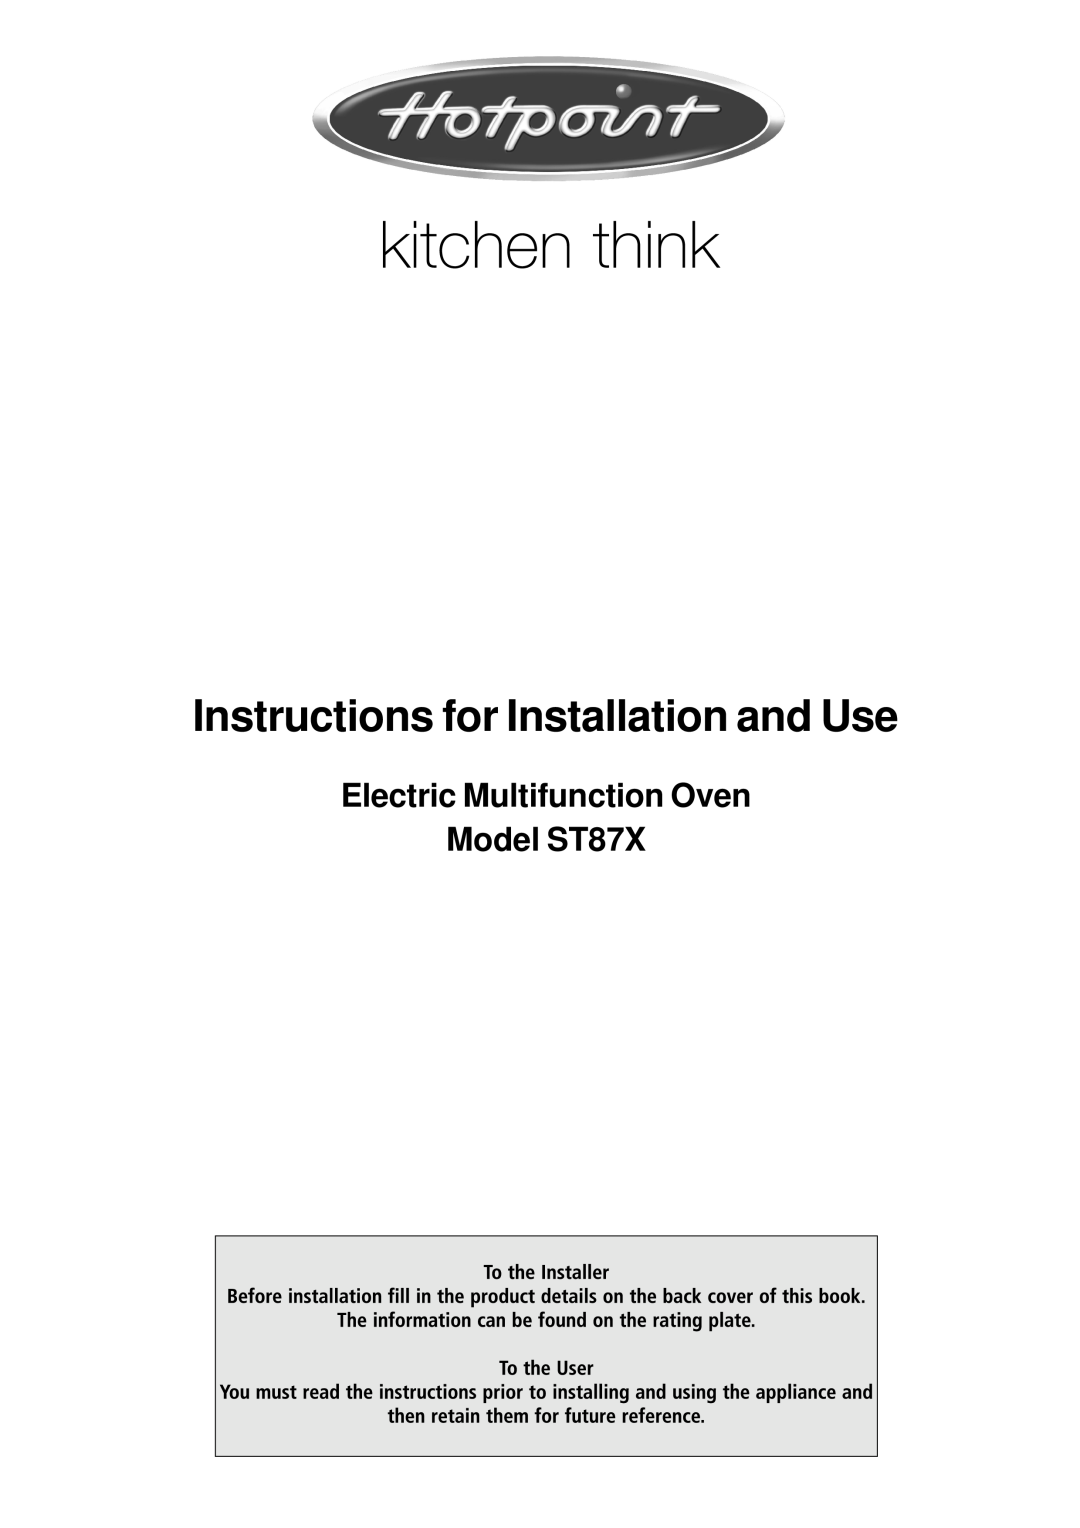 Hotpoint manual Electric Multifunction Oven Model ST87X, Instructions for Installation and Use 